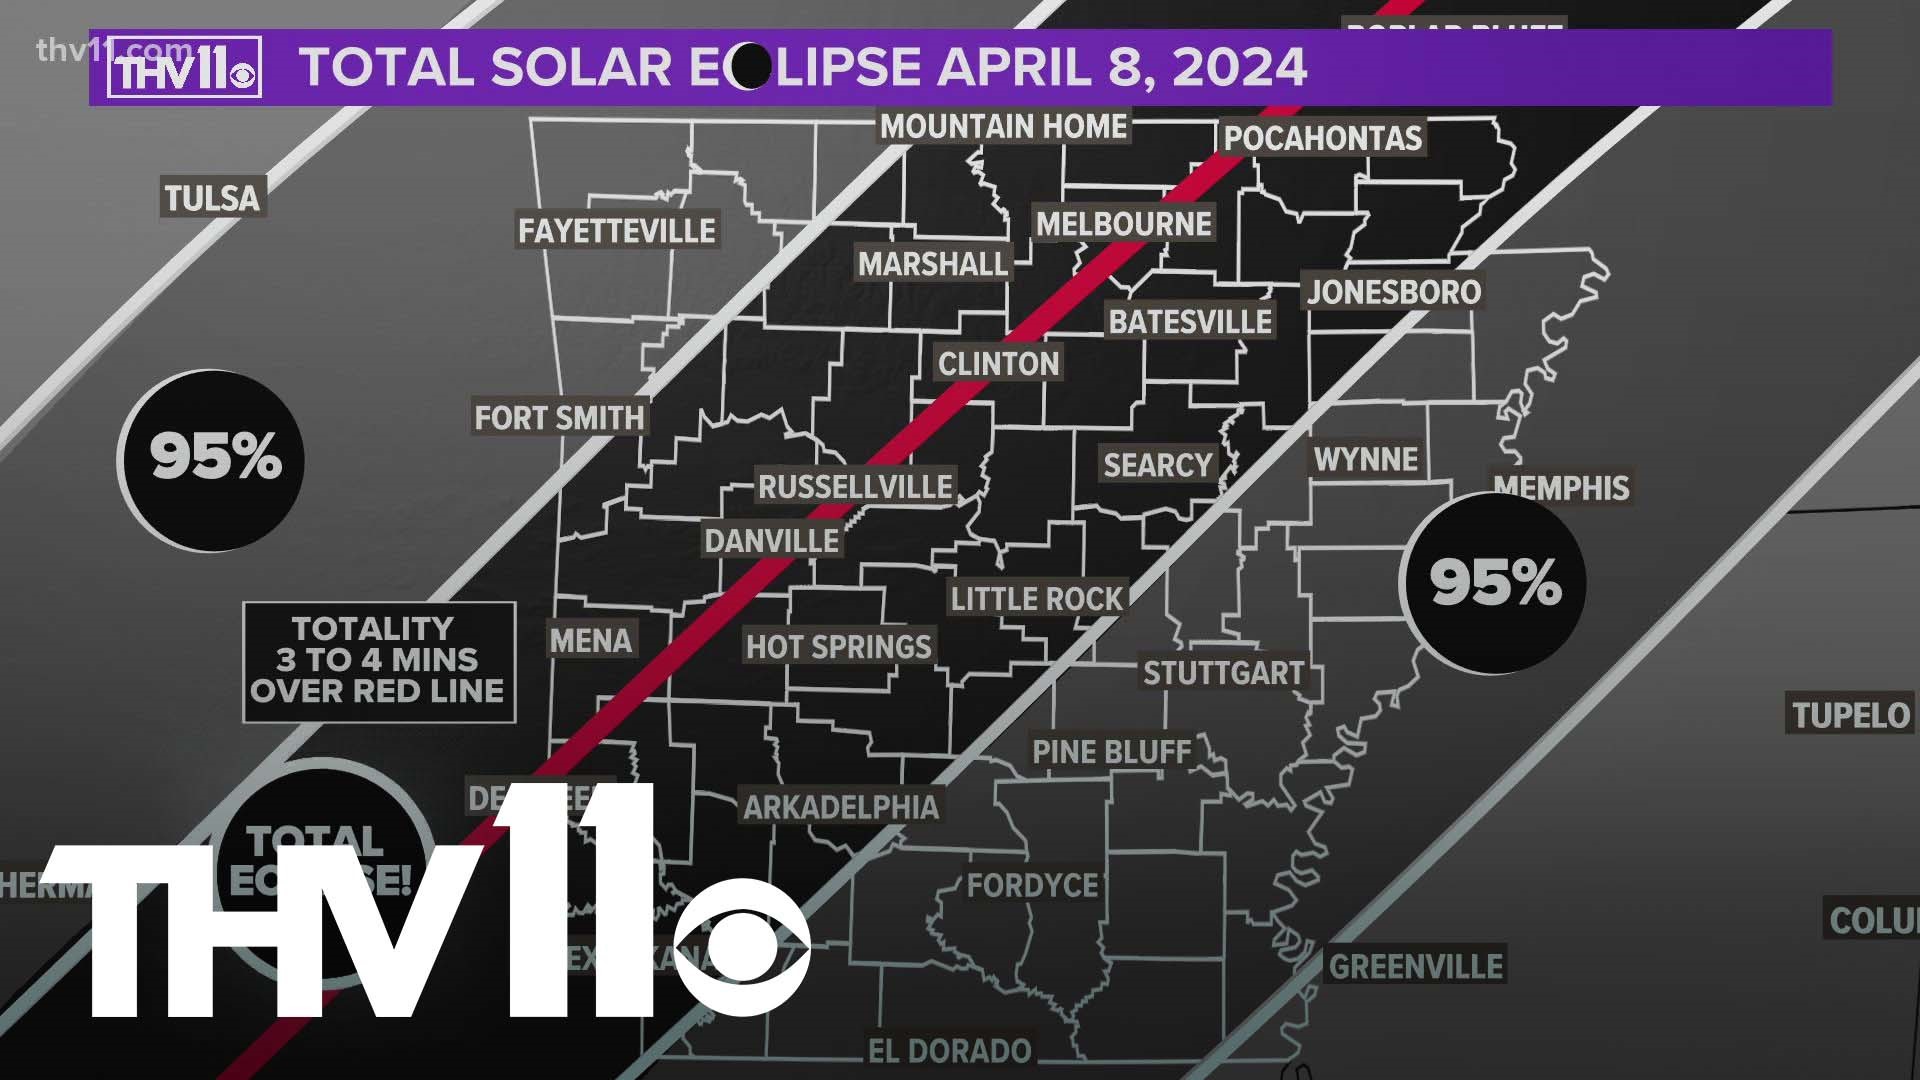 A total solar eclipse, a once in a lifetime event, is happening on April 8, 2024 - two years from now.